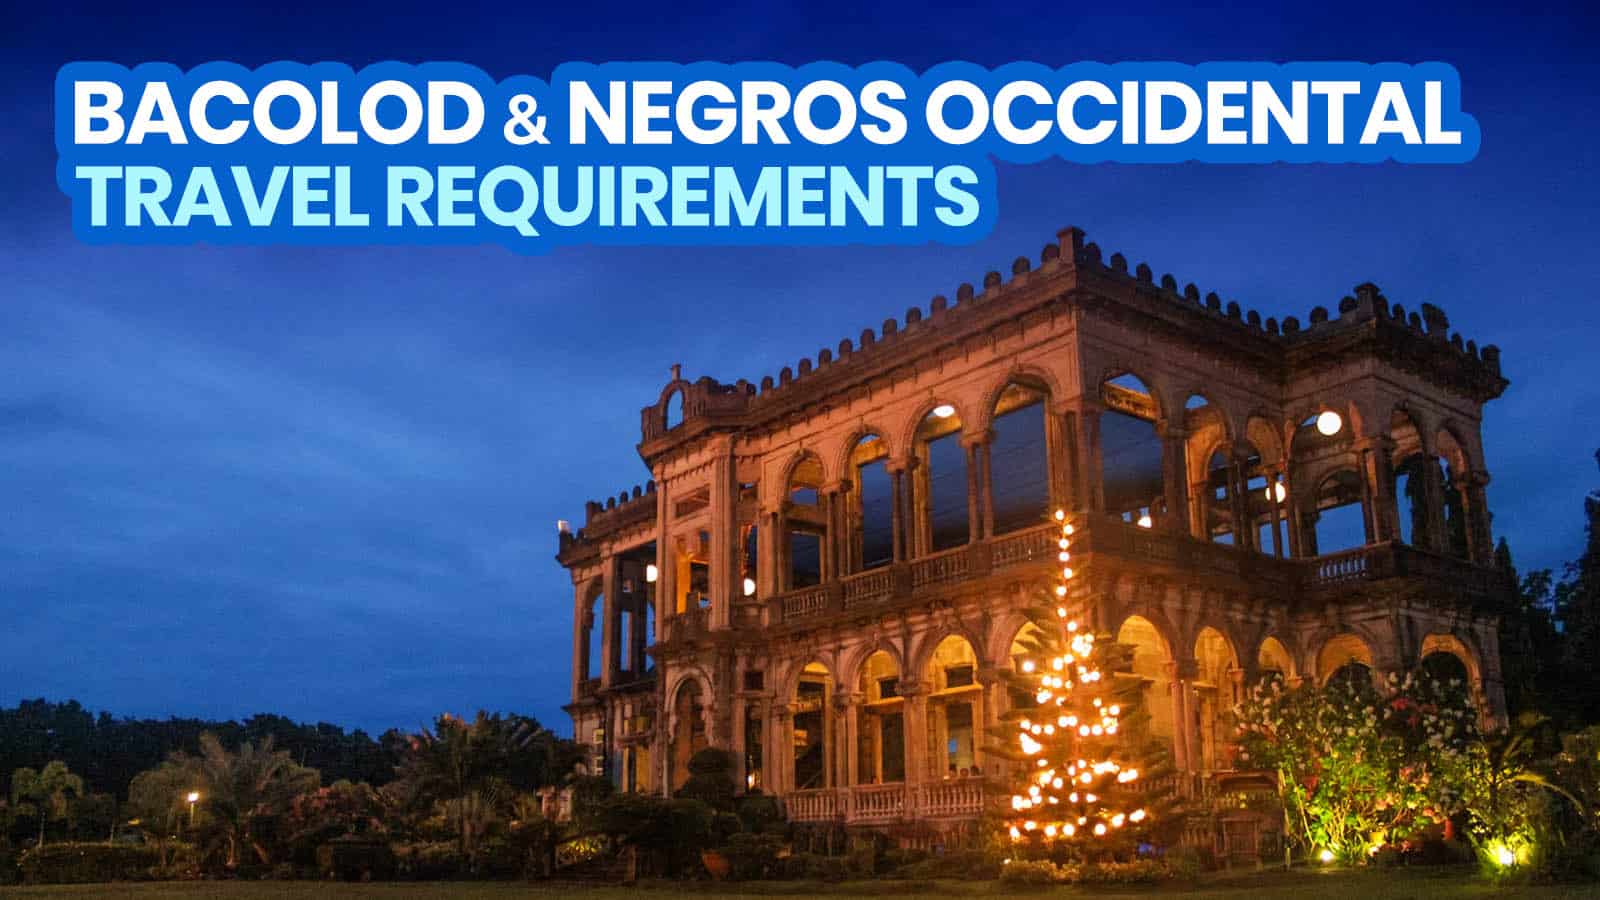 BACOLOD & NEGROS OCCIDENTAL: New Normal Travel Requirements